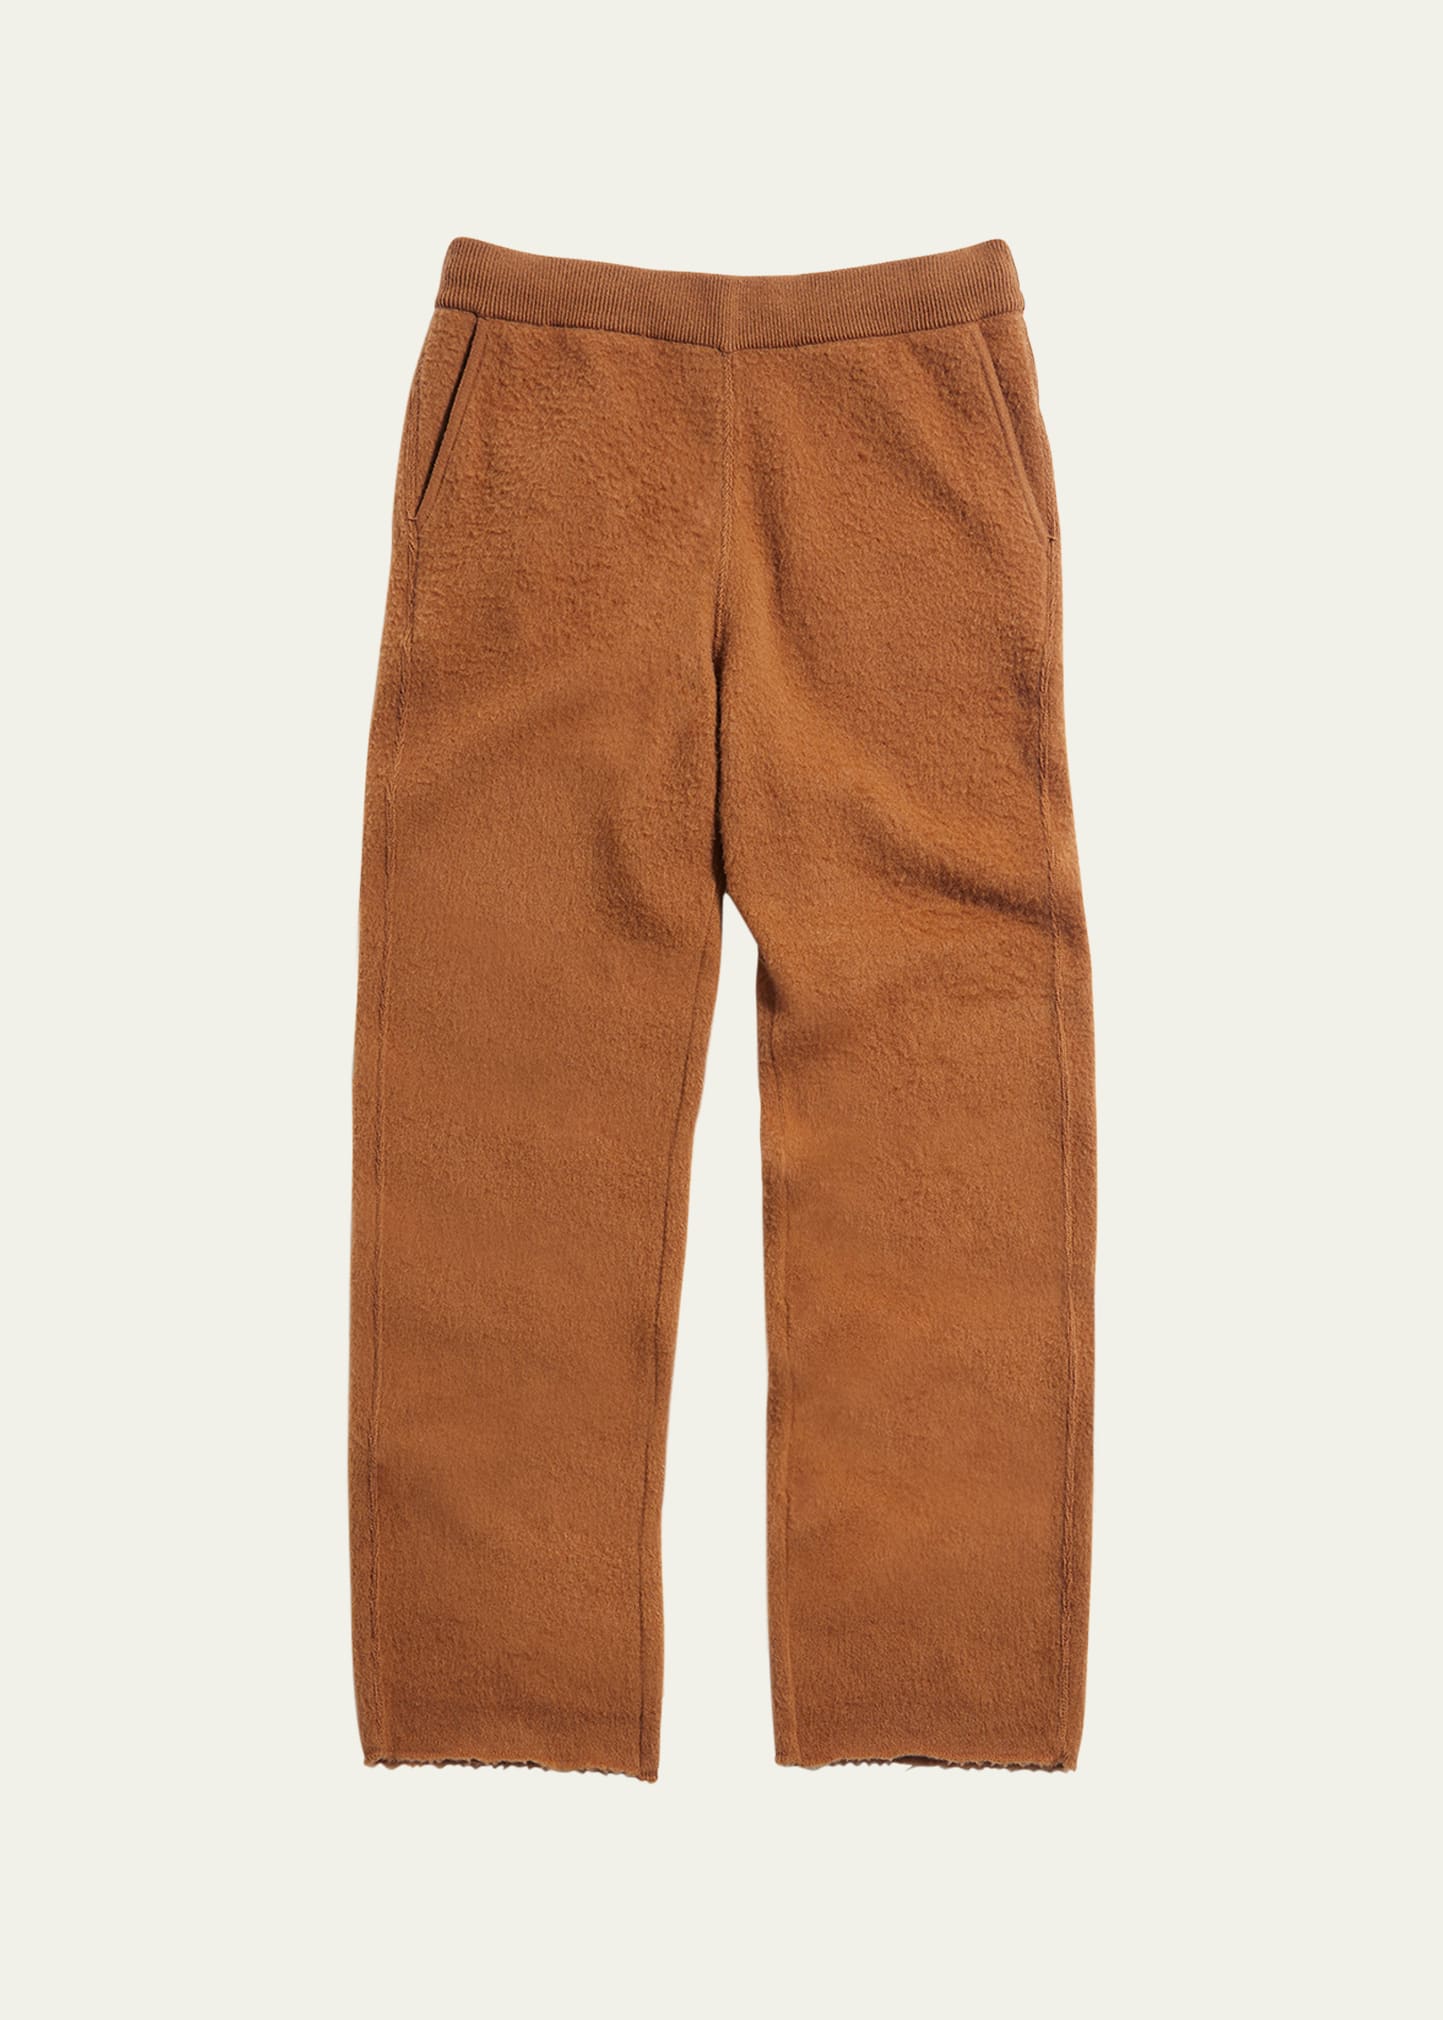 Men's Oasi Cashmere Brushed Pull-On Pants